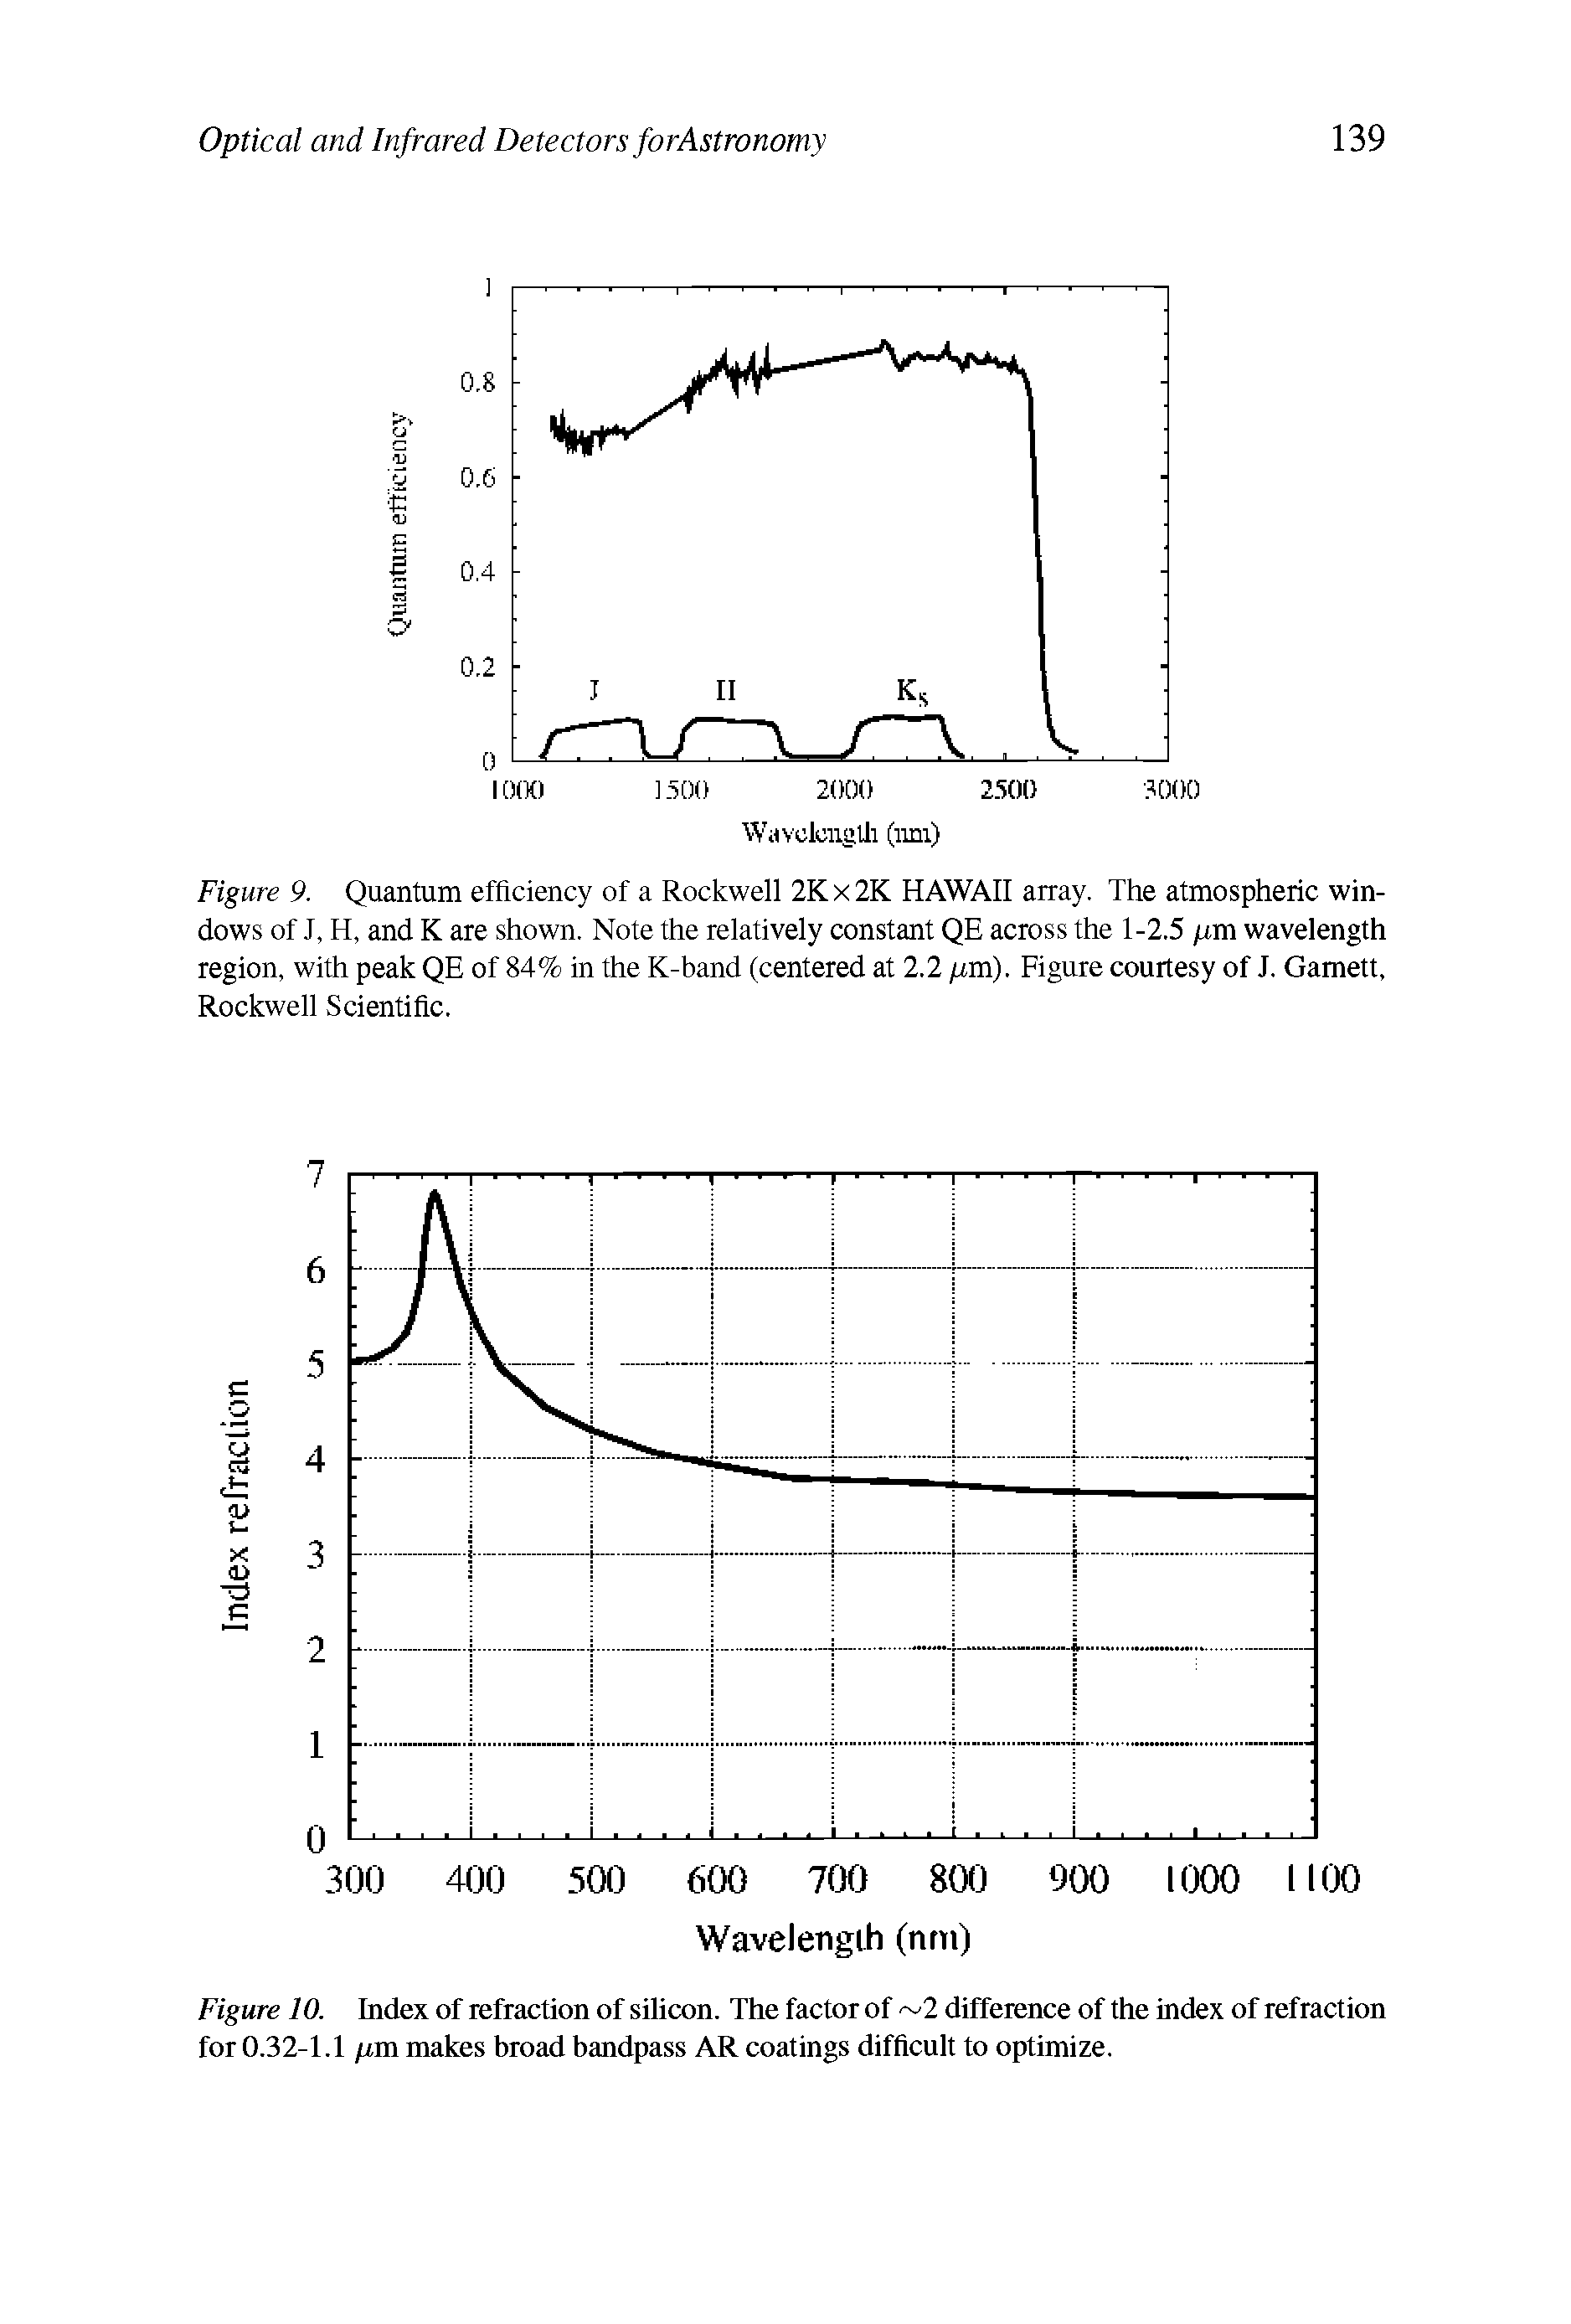 Figure 9. Quantum efficiency of a Rockwell 2Kx2K HAWAII array. The atmospheric windows of I, H, and K are shown. Note the relatively constant QE across the 1-2.5 p,m wavelength region, with peak QE of 84% in the K-band (centered at 2.2 /um). Eigure courtesy of J. Garnett, Rockwell Scientific.